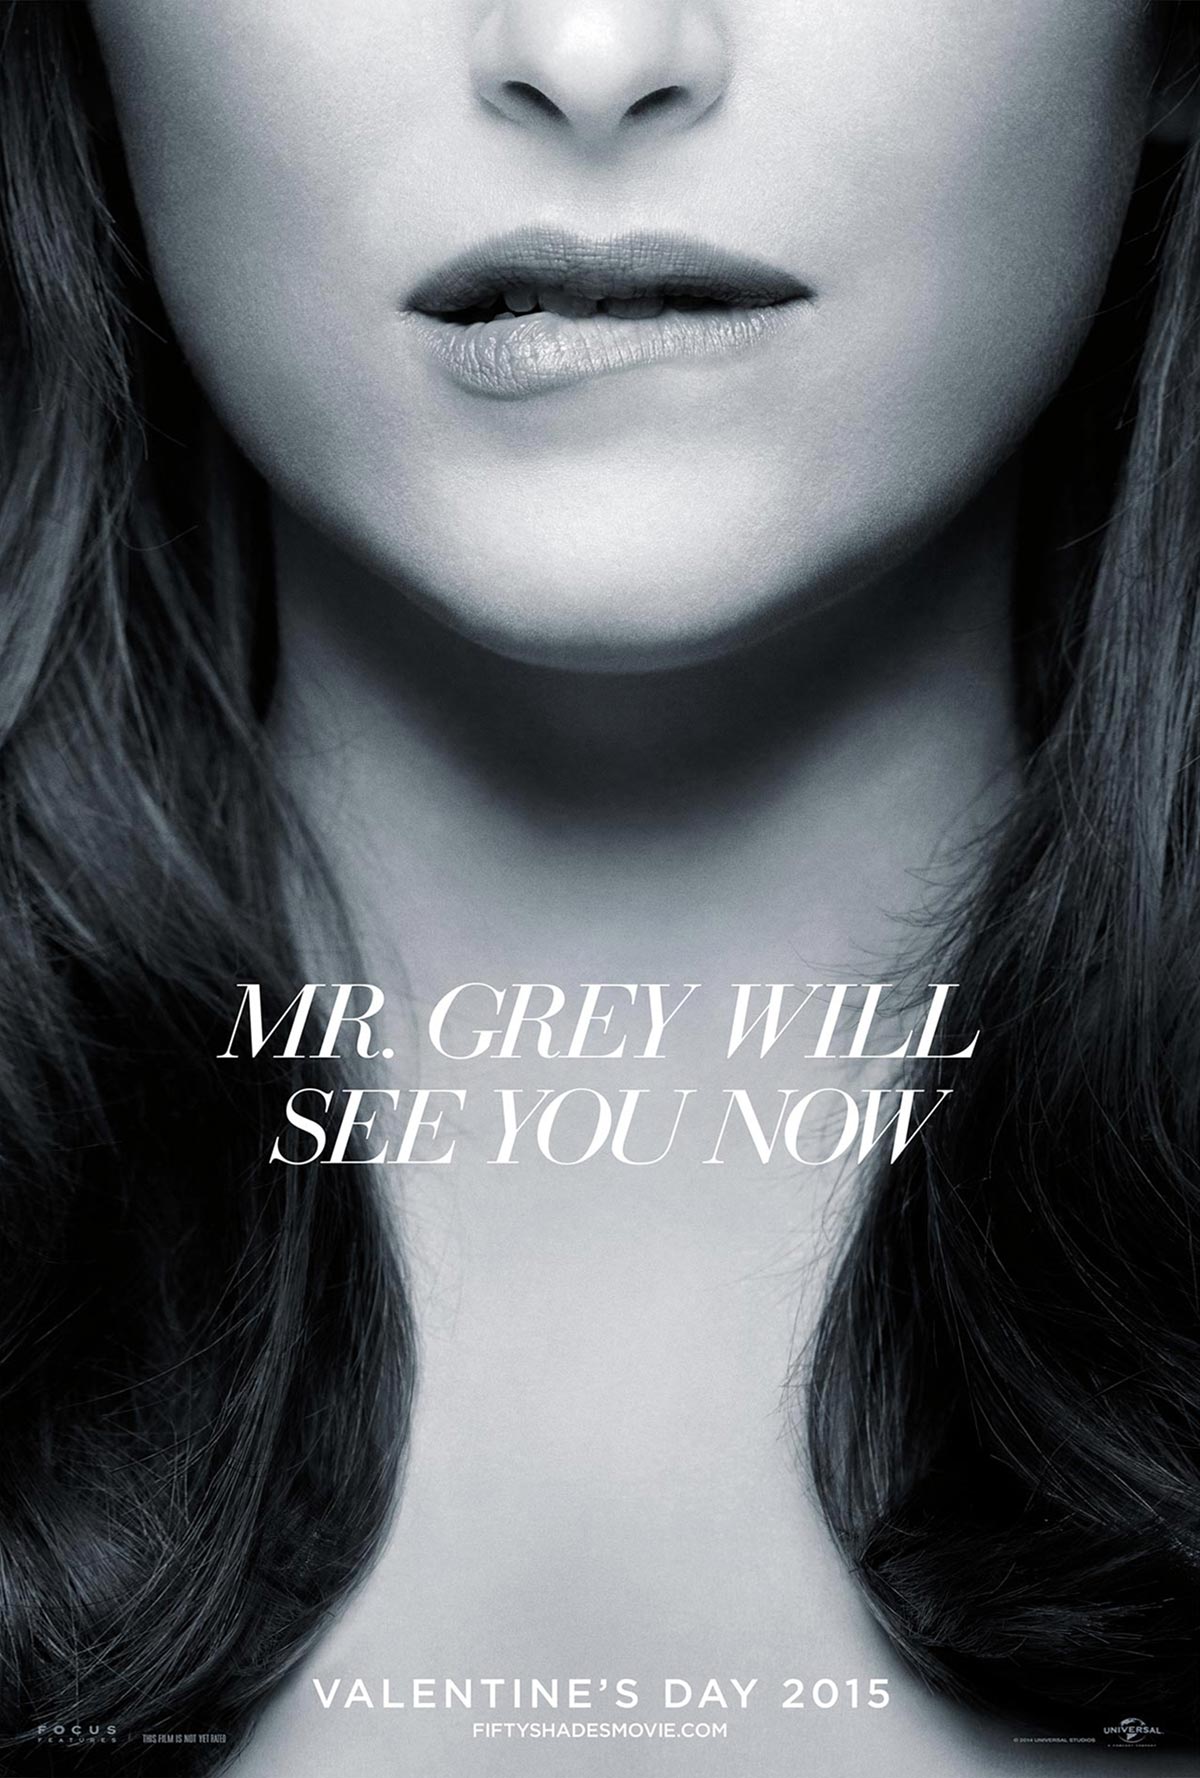 015_dreamogram-iconisus-key-art-movie-poster-fifty-shades-of-grey_vertical-cover